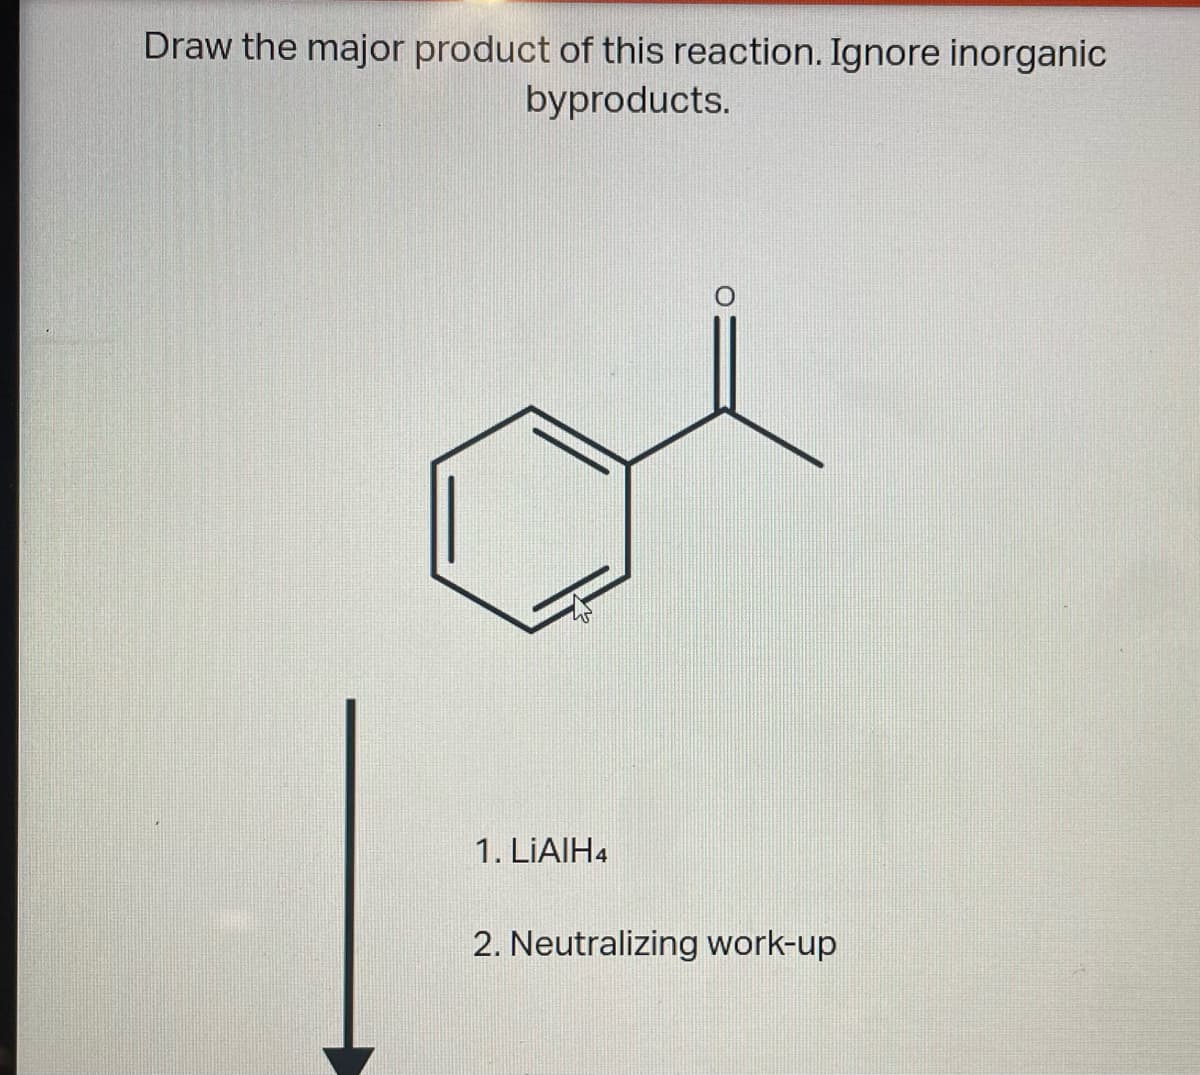 Draw the major product of this reaction. Ignore inorganic
byproducts.
1. LIAIH4
2. Neutralizing work-up